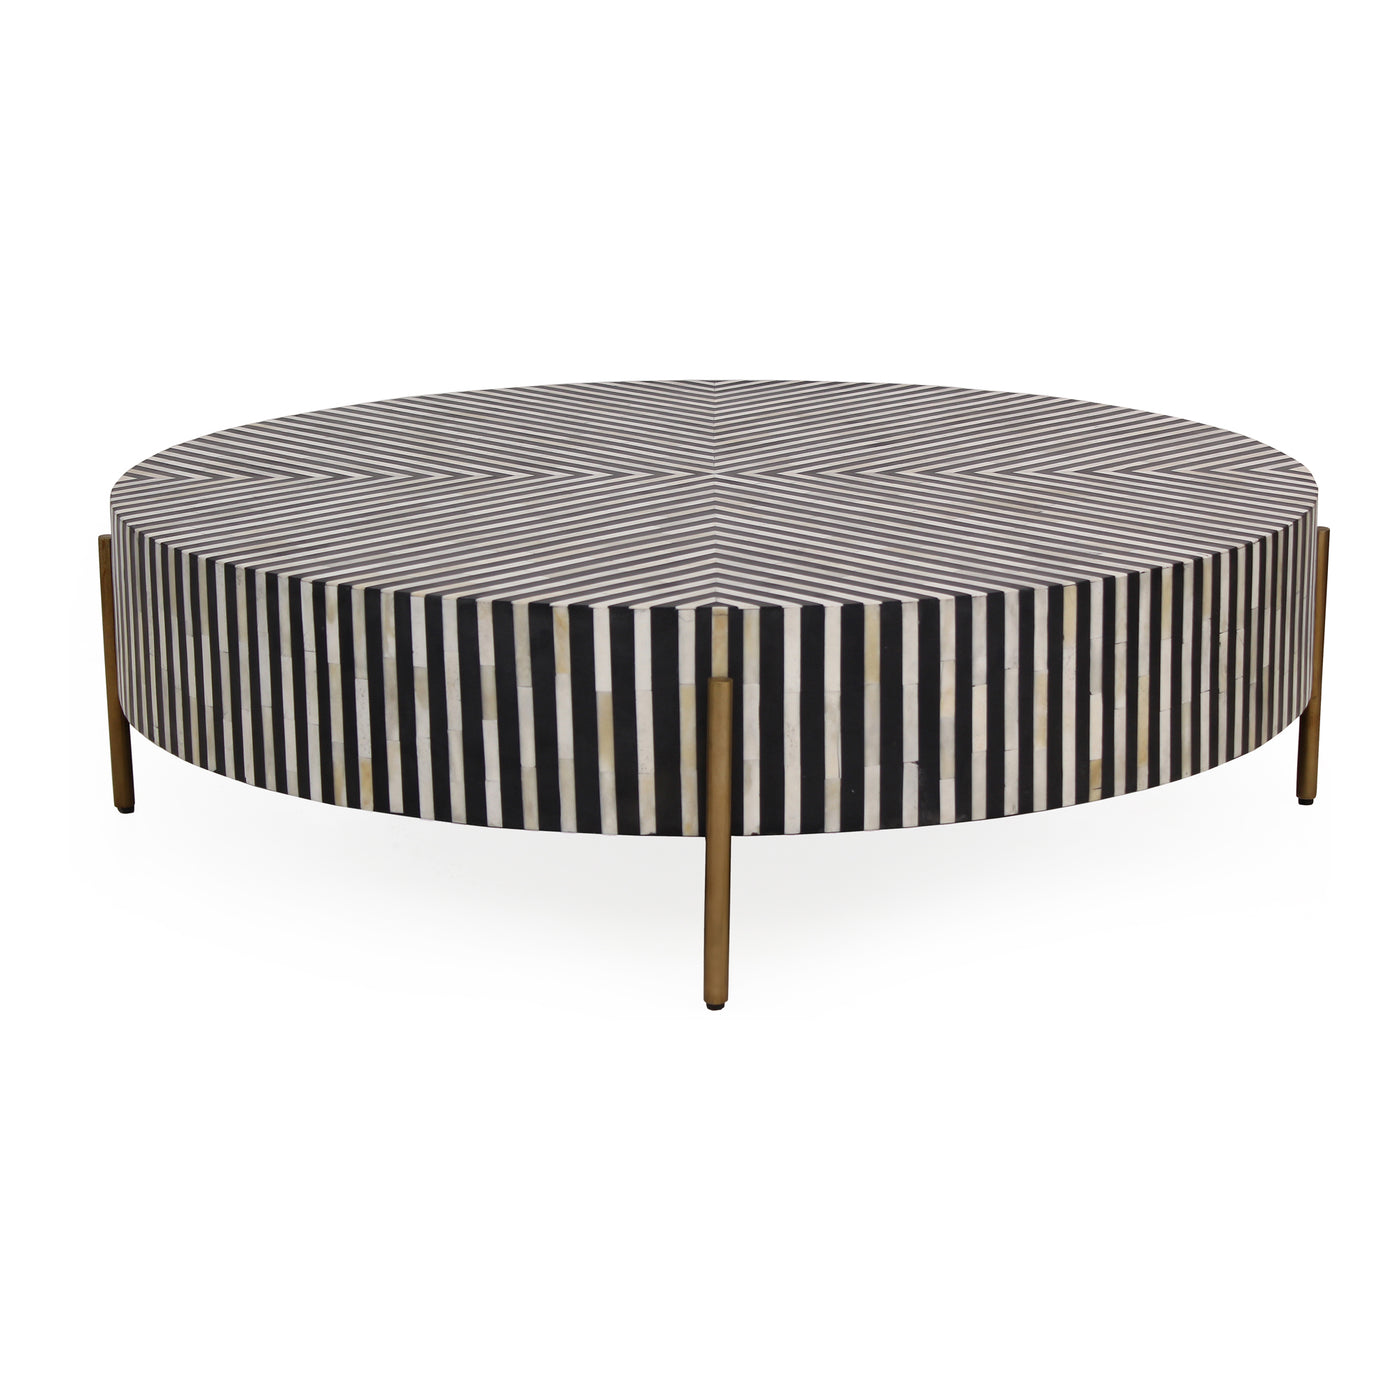 Simplistic and bold, the Chameau coffee table is an exercise in contrast, featuring a hypnotic art deco design. A veneer o...